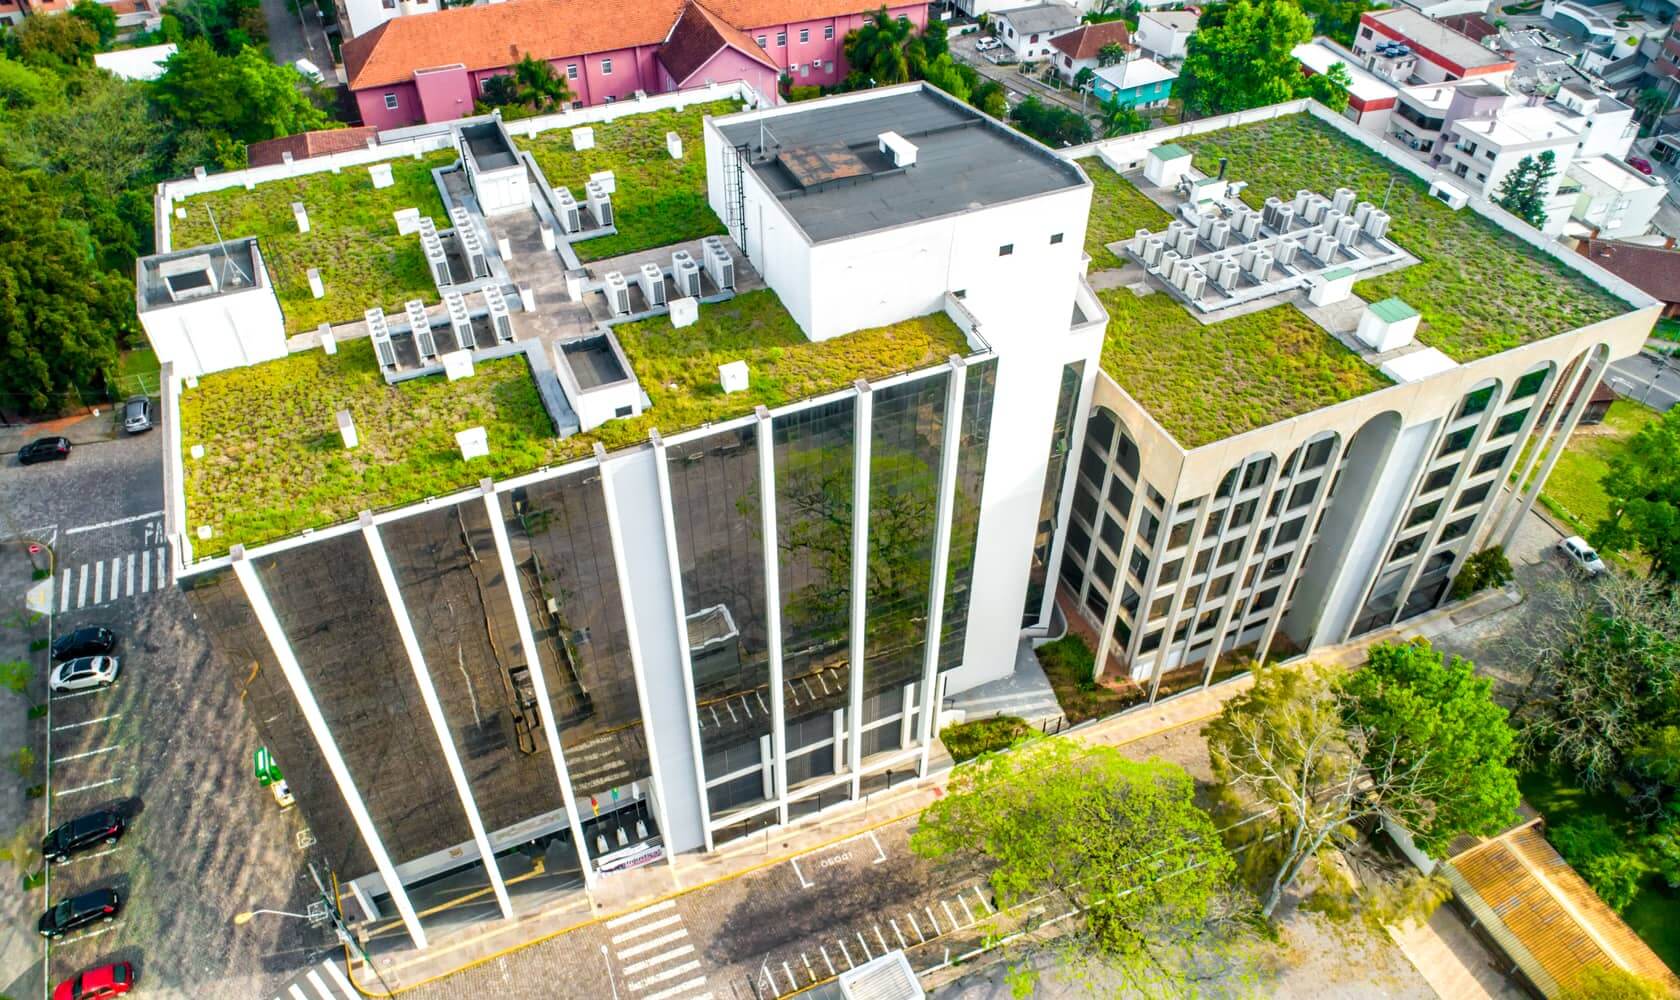 Bird's-eye view of a commercial green roof.